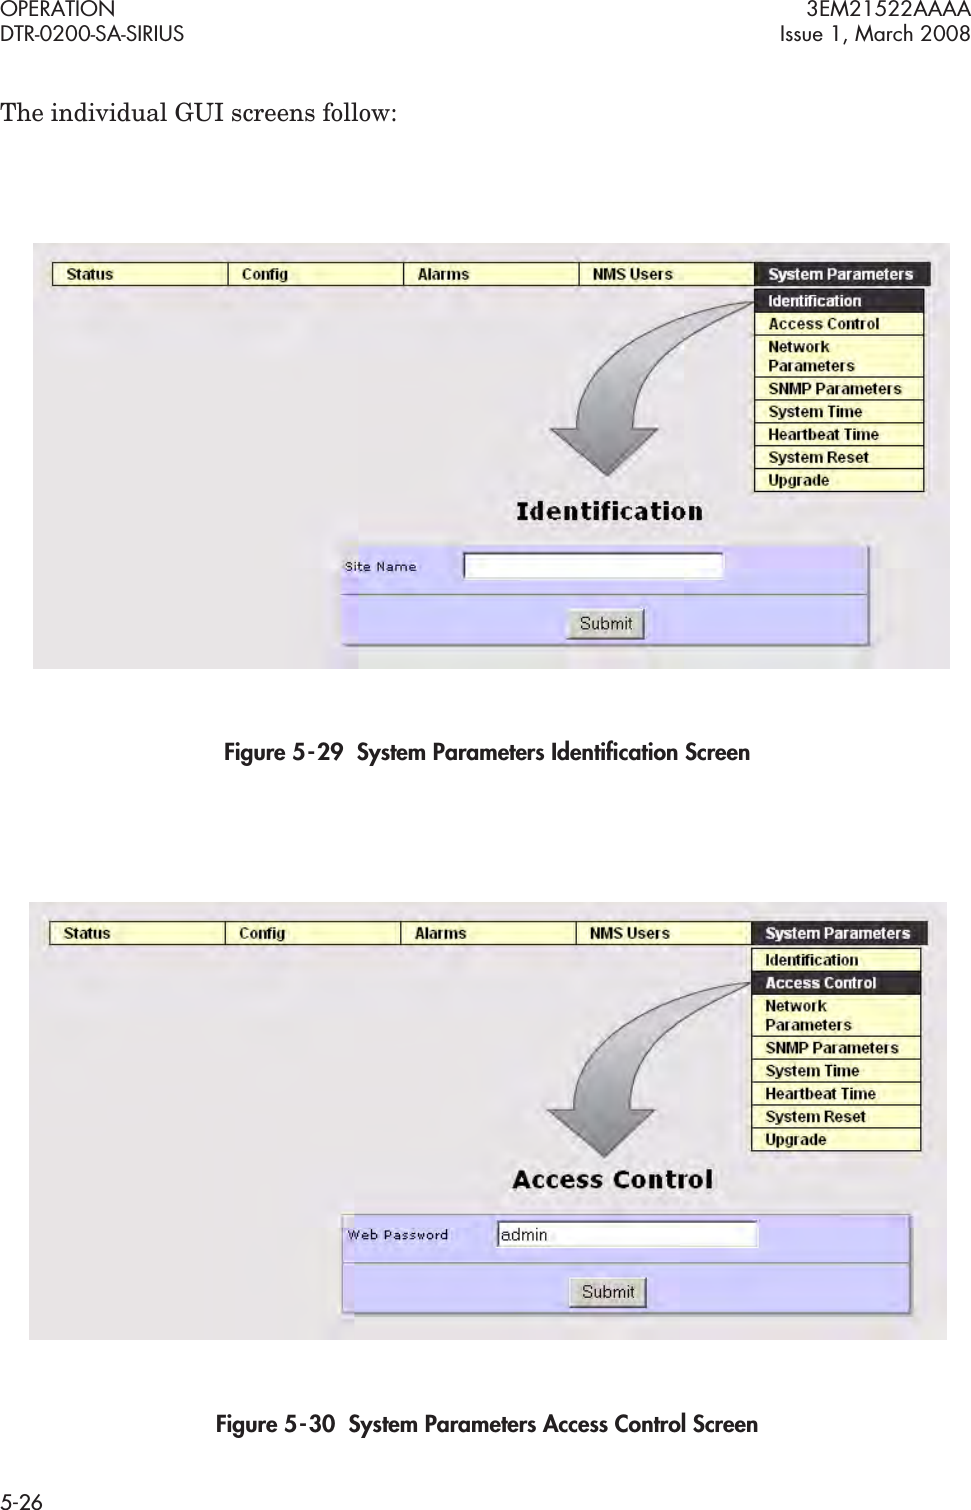 OPERATION 3EM21522AAAADTR-0200-SA-SIRIUS Issue 1, March 20085-26The individual GUI screens follow:Figure 5  -  29  System Parameters Identiﬁcation ScreenFigure 5  -  30  System Parameters Access Control Screen